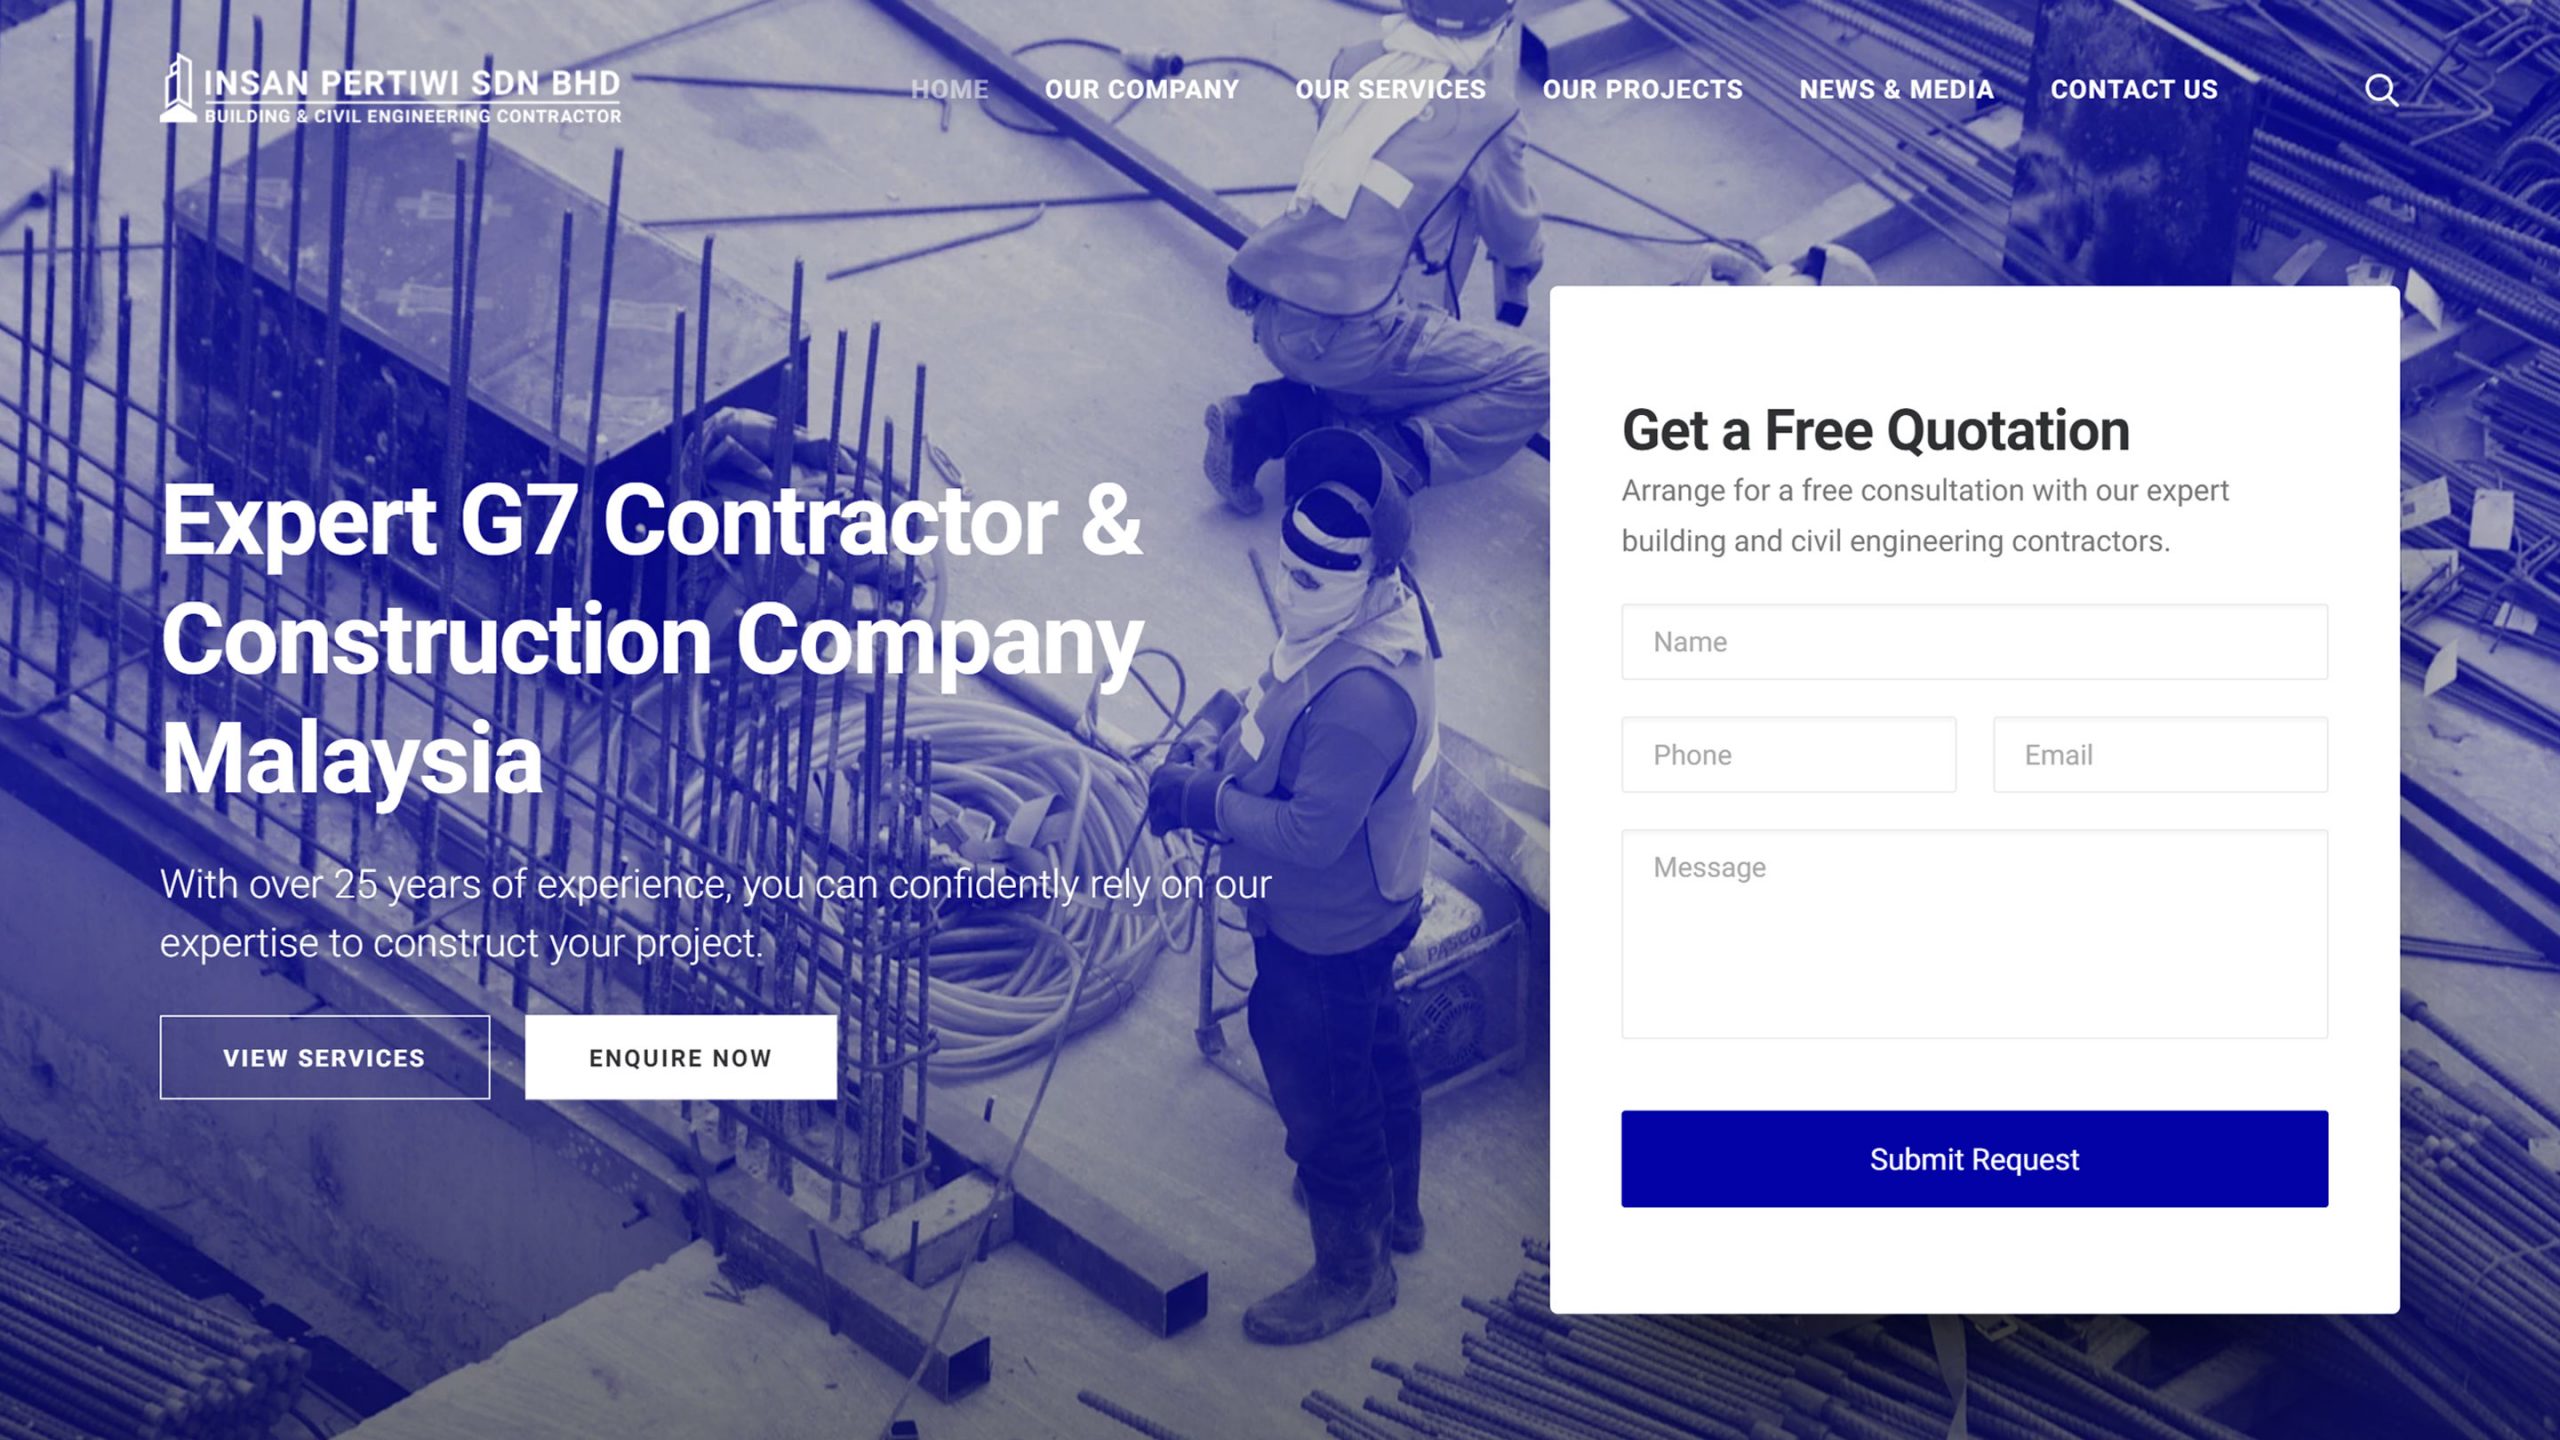 G7 contractor and construction company in malaysia.